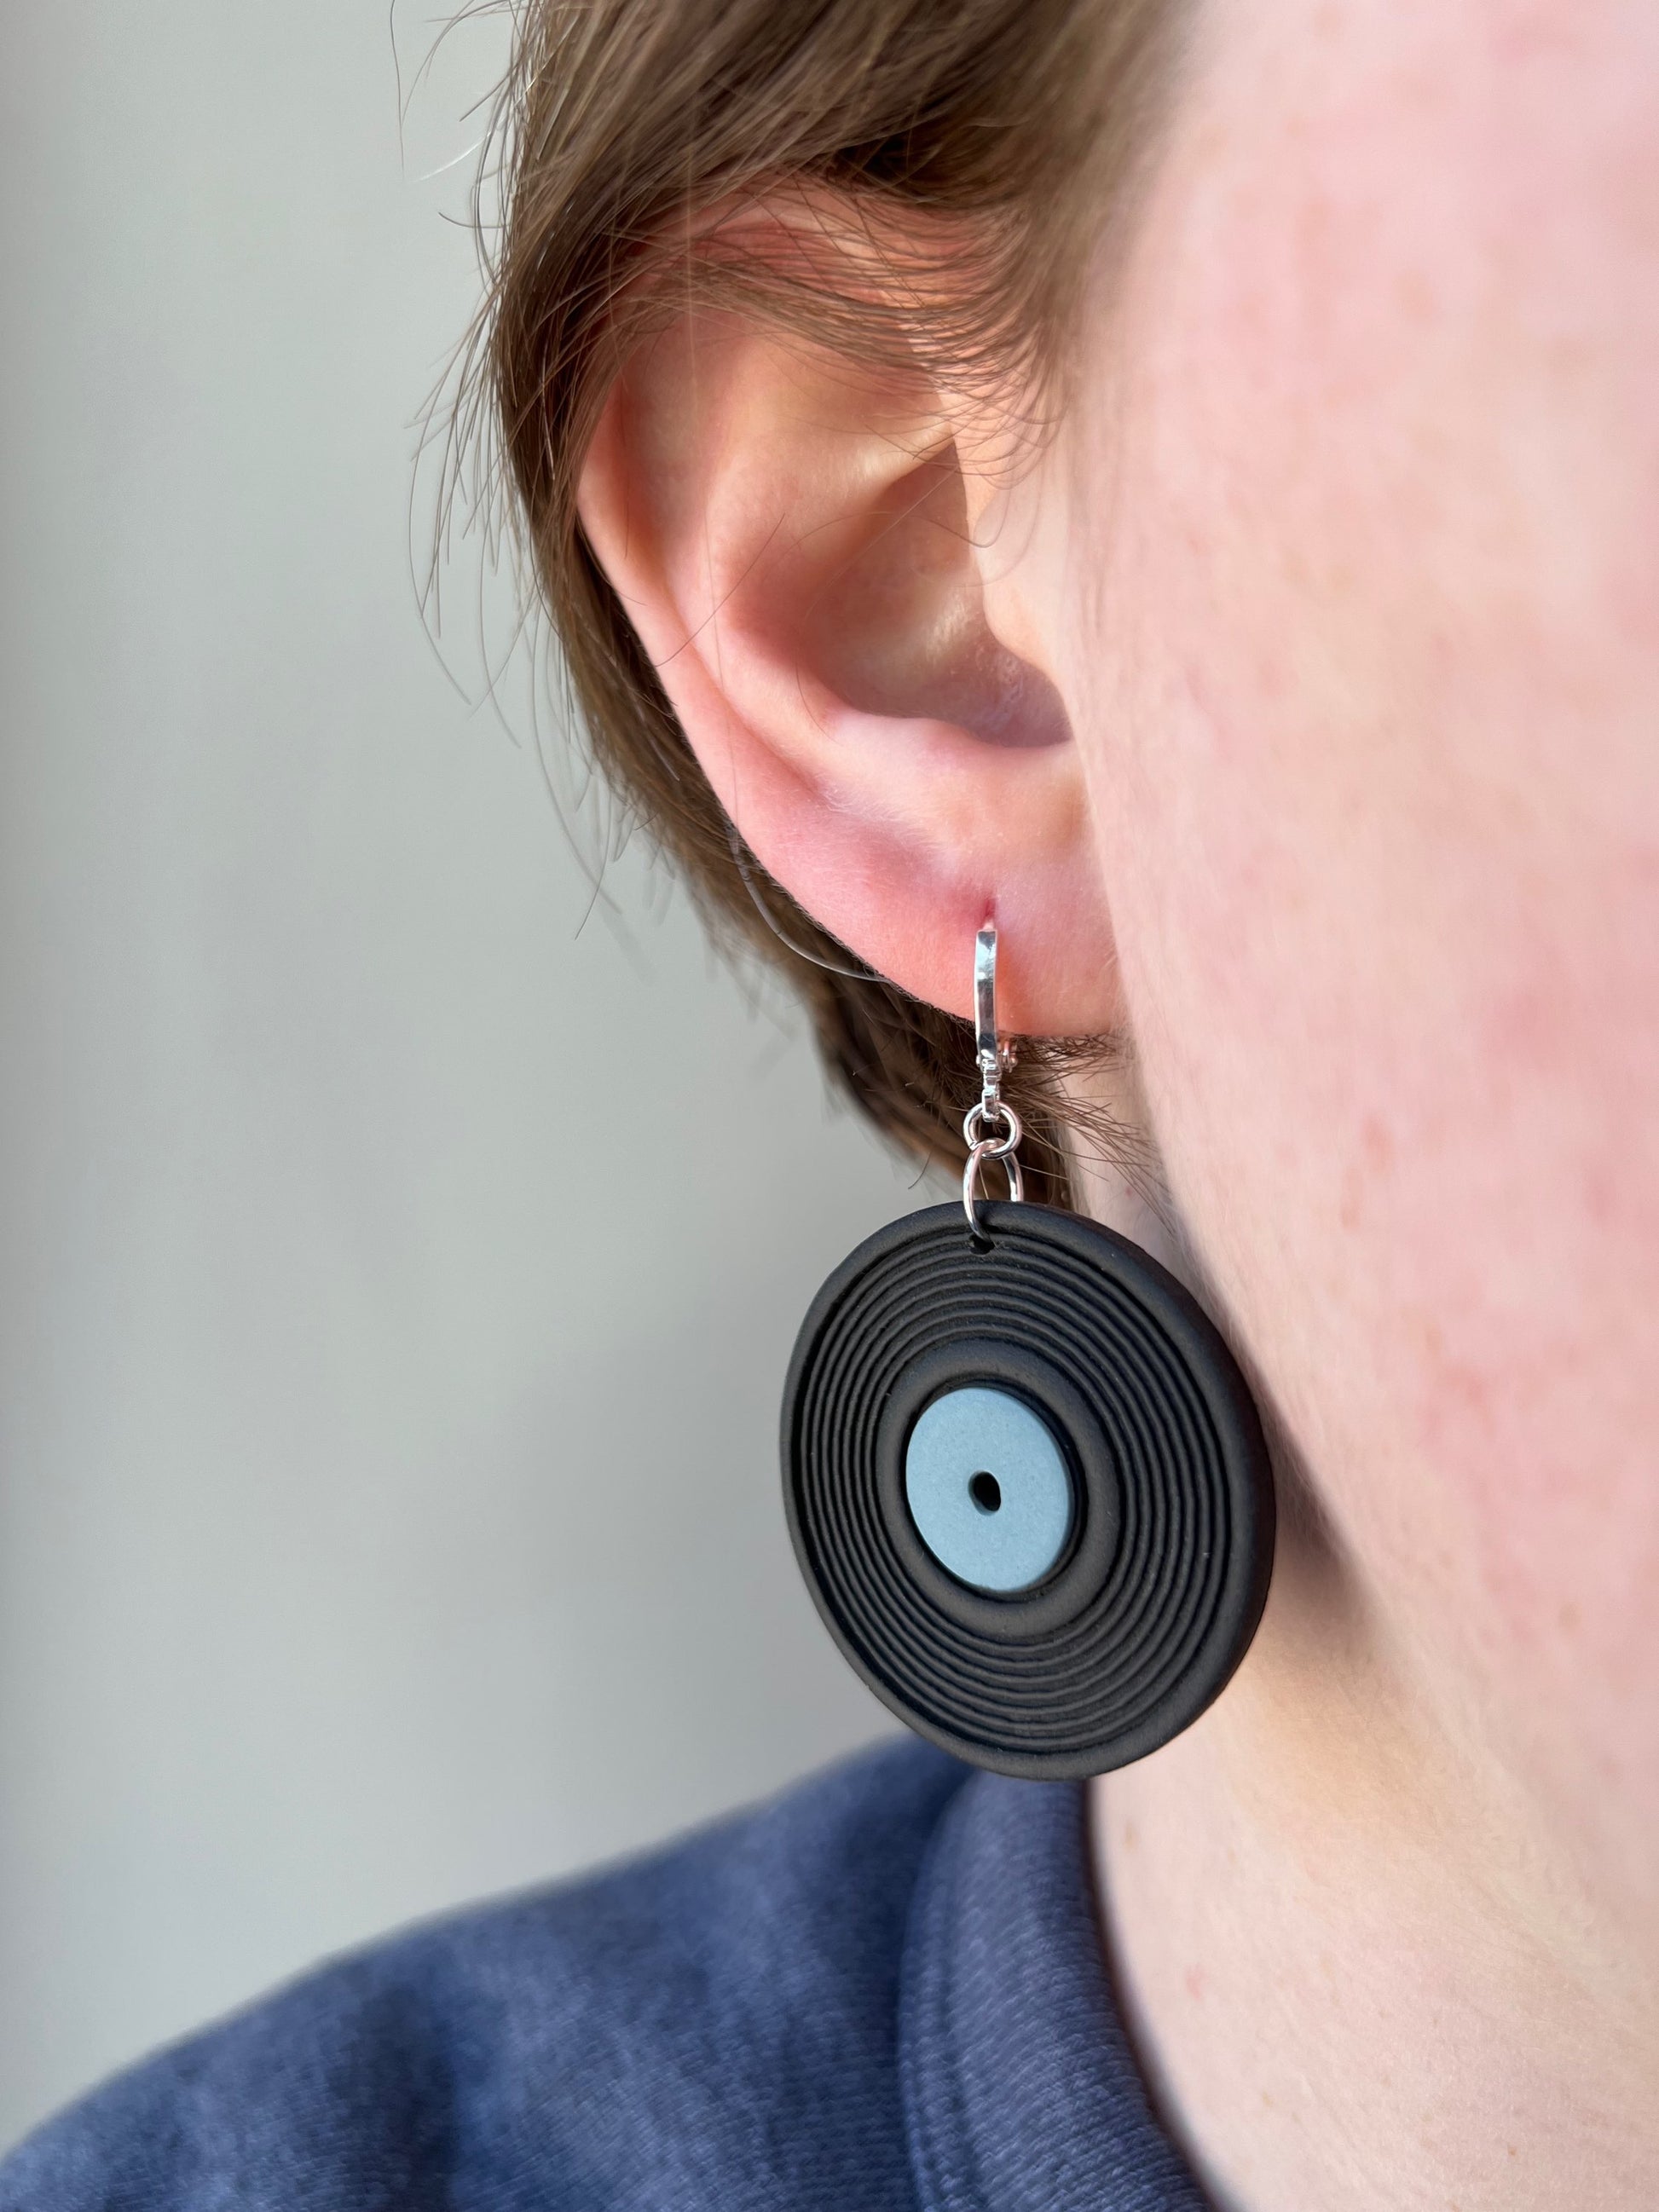 woman wearing a vinyl record earring with a blue label